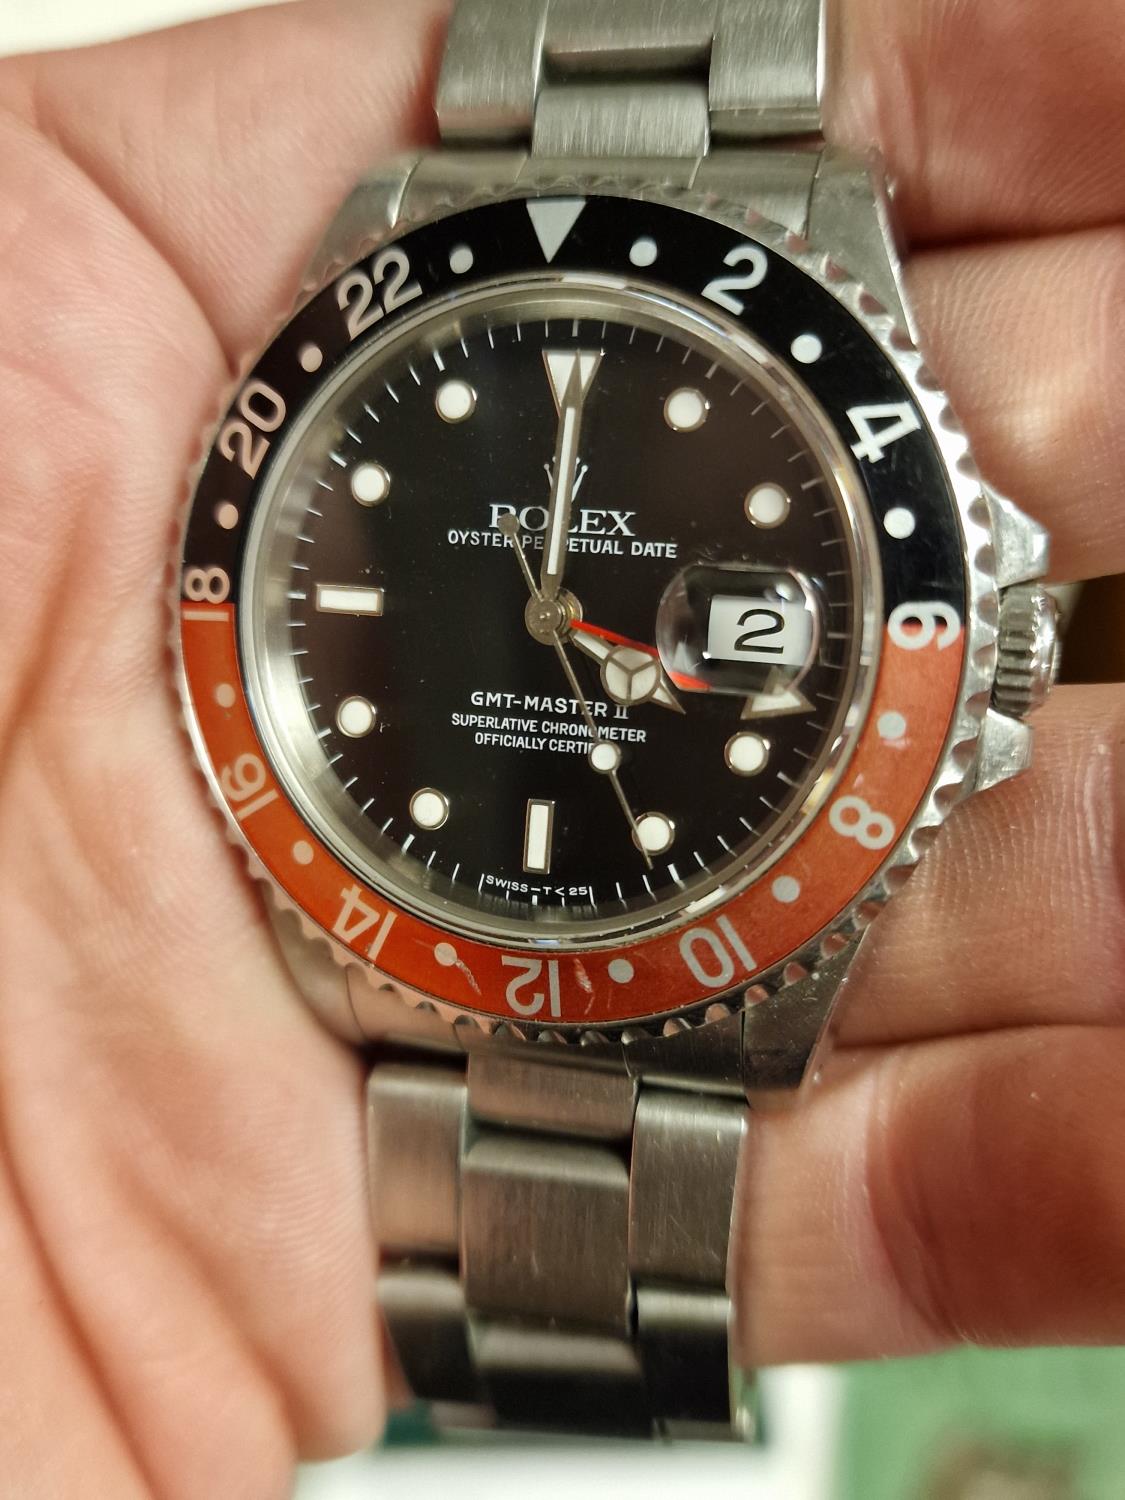 Boxed Rolex GMT II Chronometer Oyster Wrist Watch - Boxed with some paperwork - Image 3 of 11